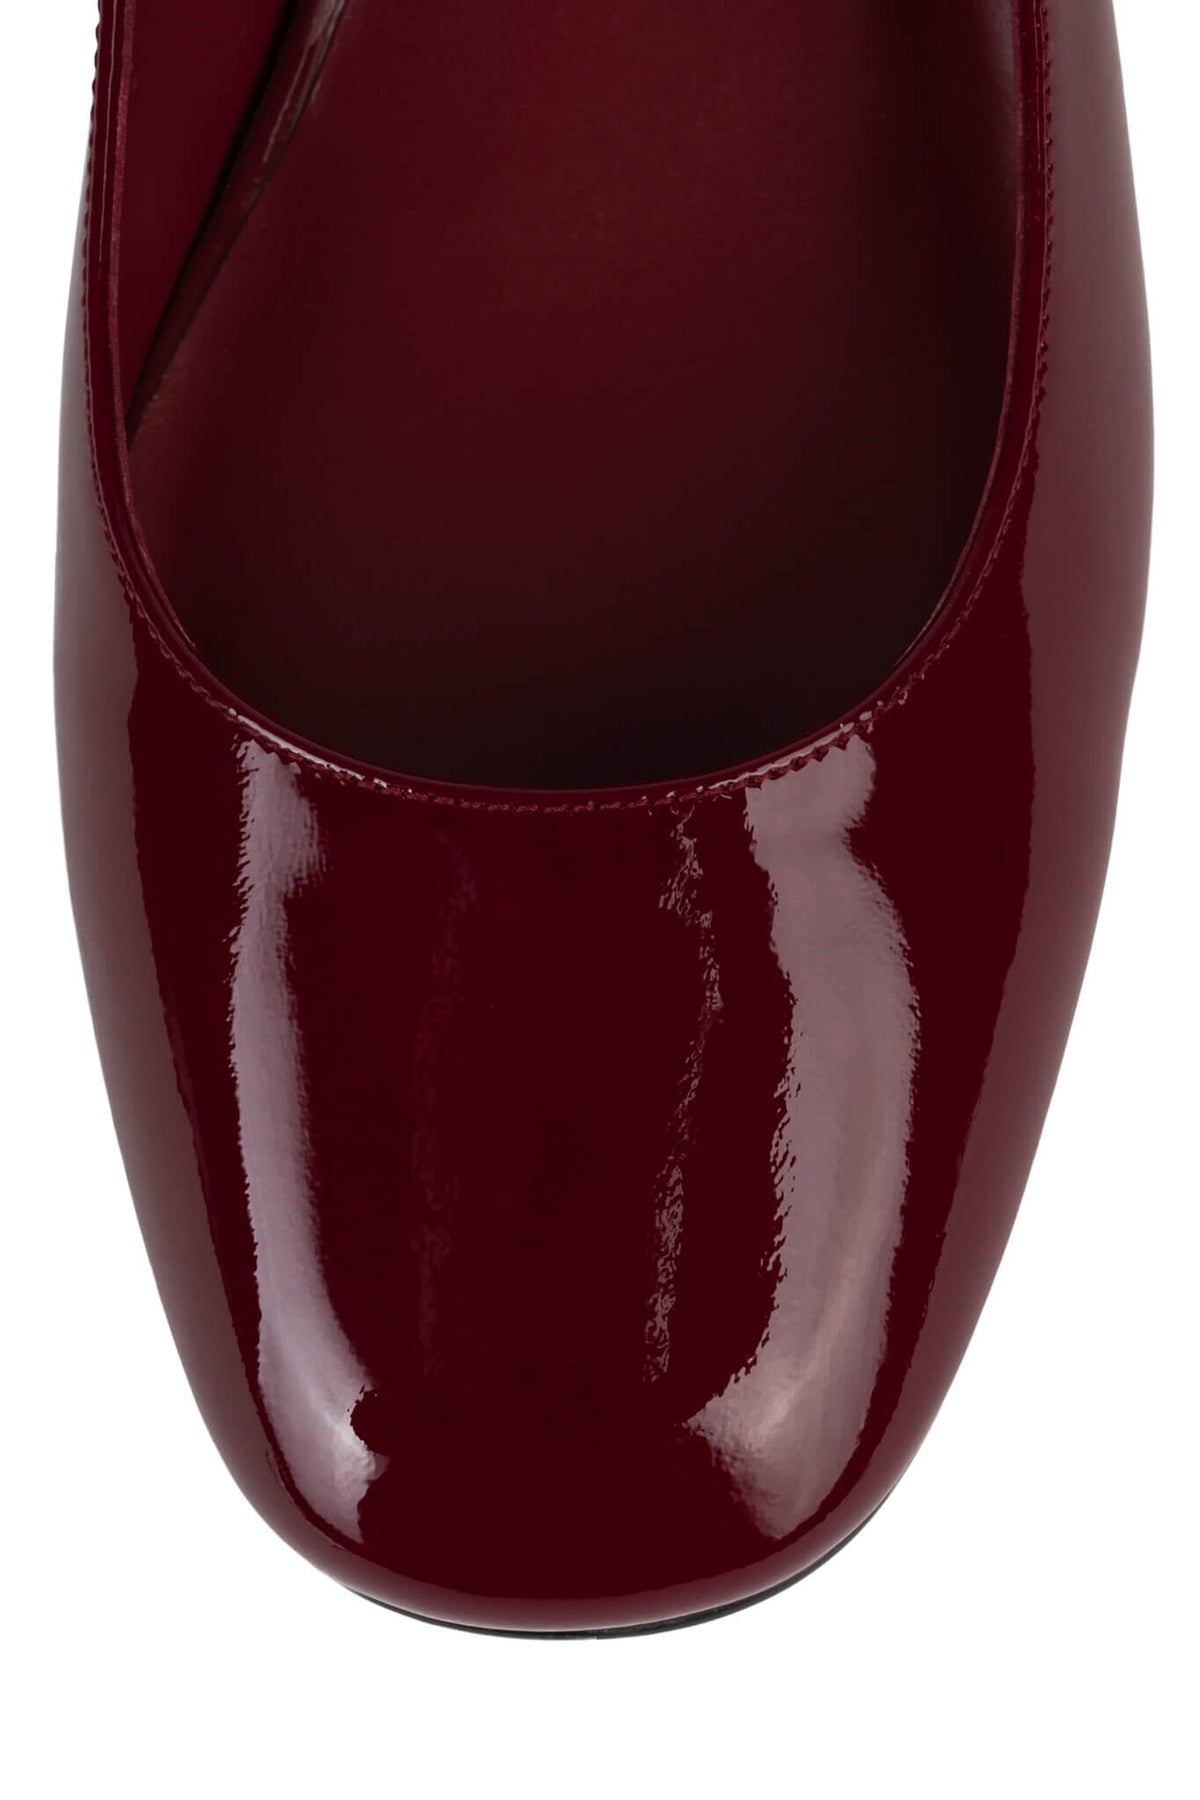 TOP-TIER Jeffrey Campbell Mary-Janes Cherry Red Patent